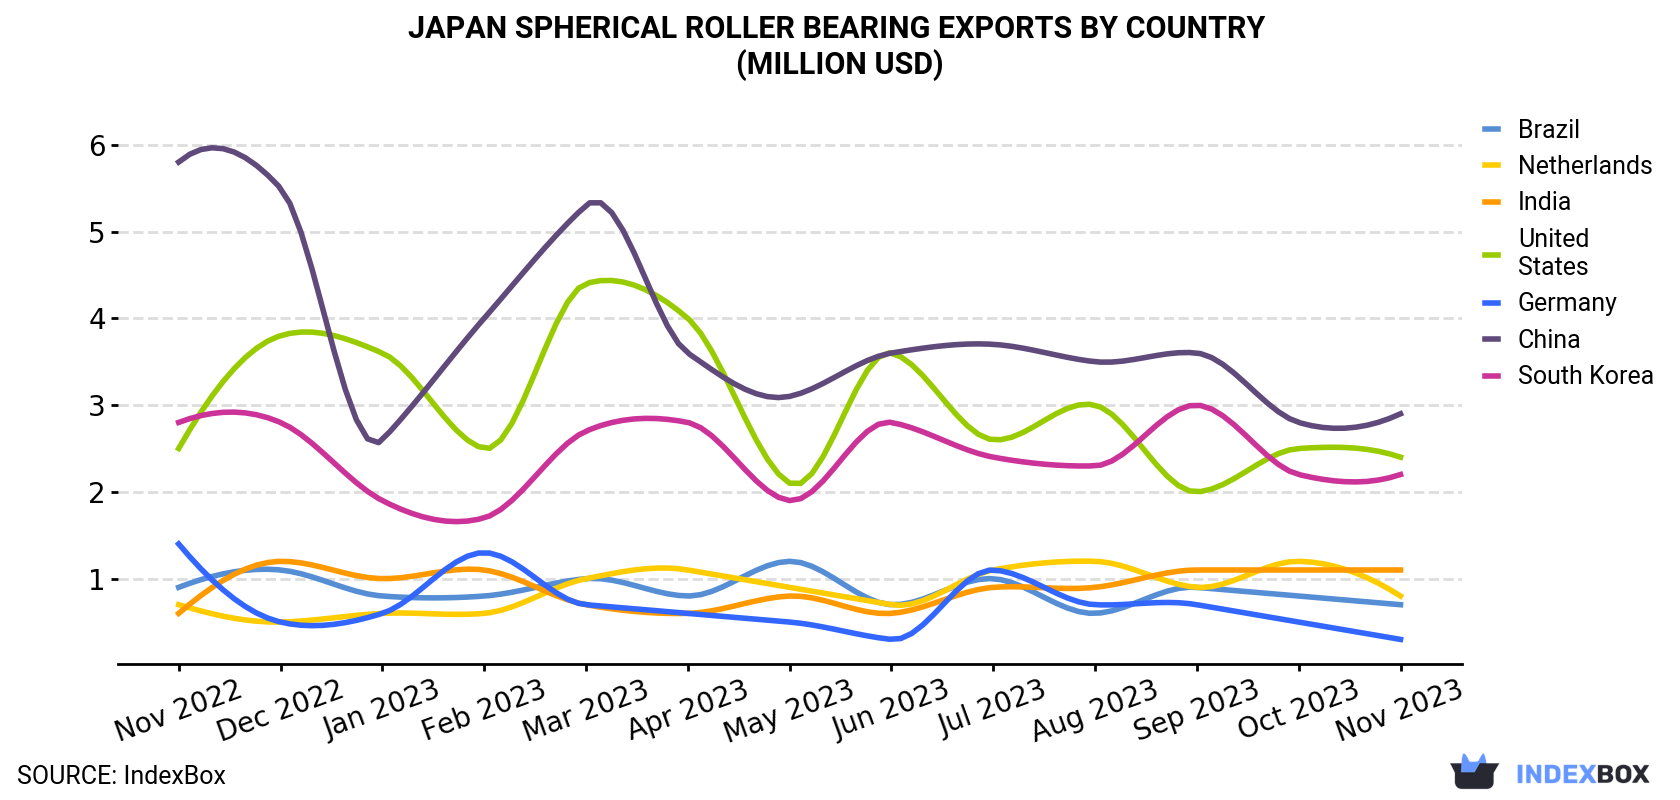 Japan Spherical Roller Bearing Exports By Country (Million USD)